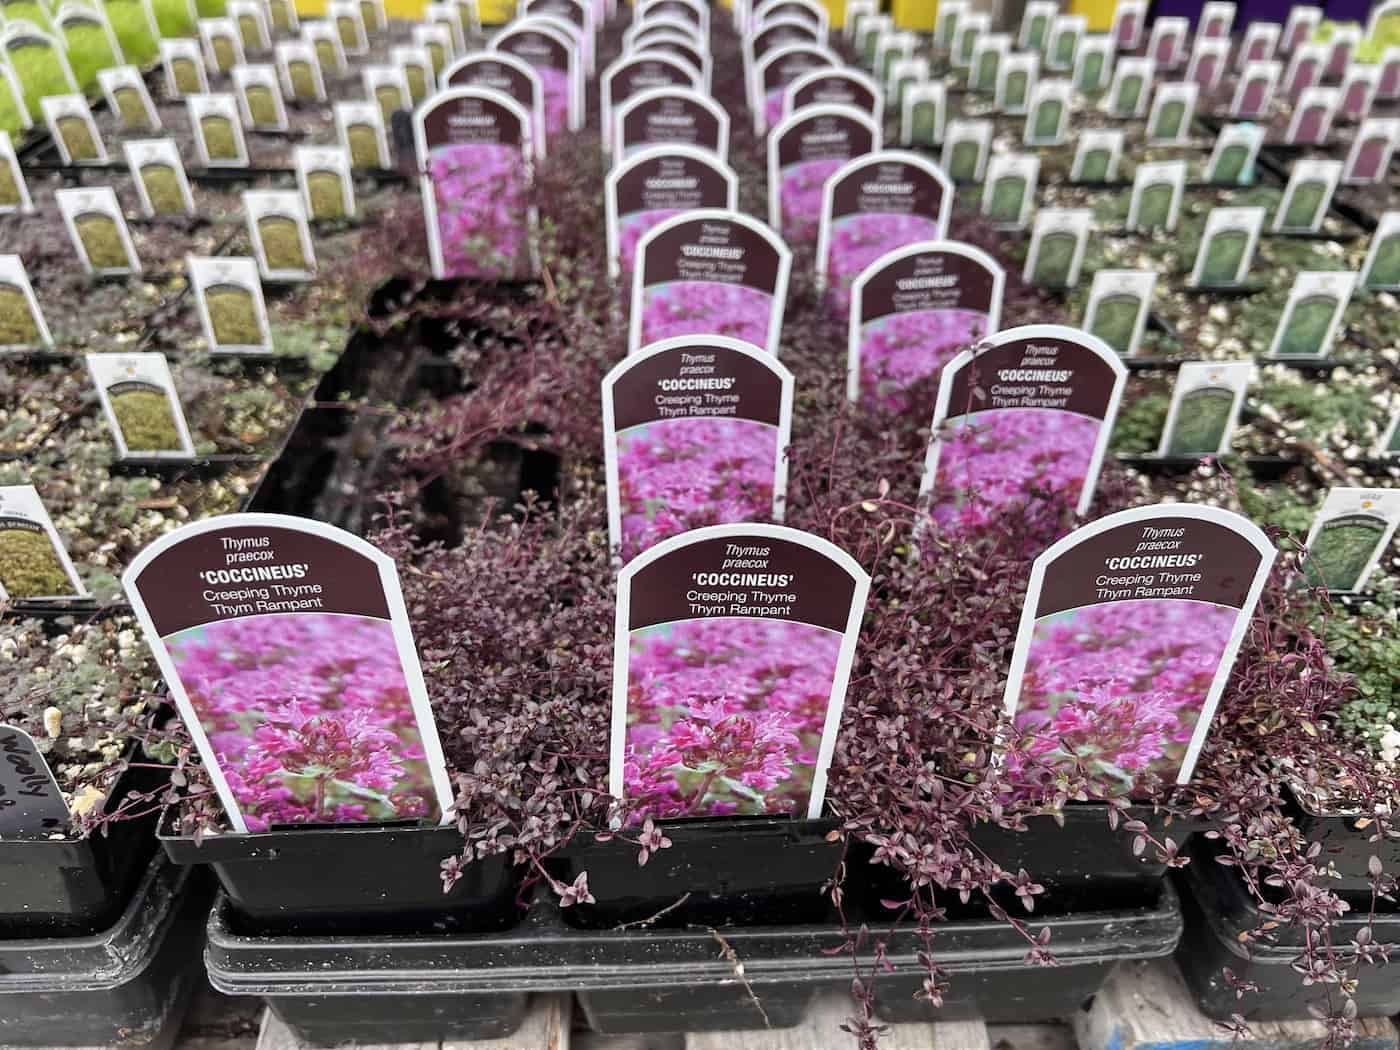 Red creeping thyme for sale at garden center